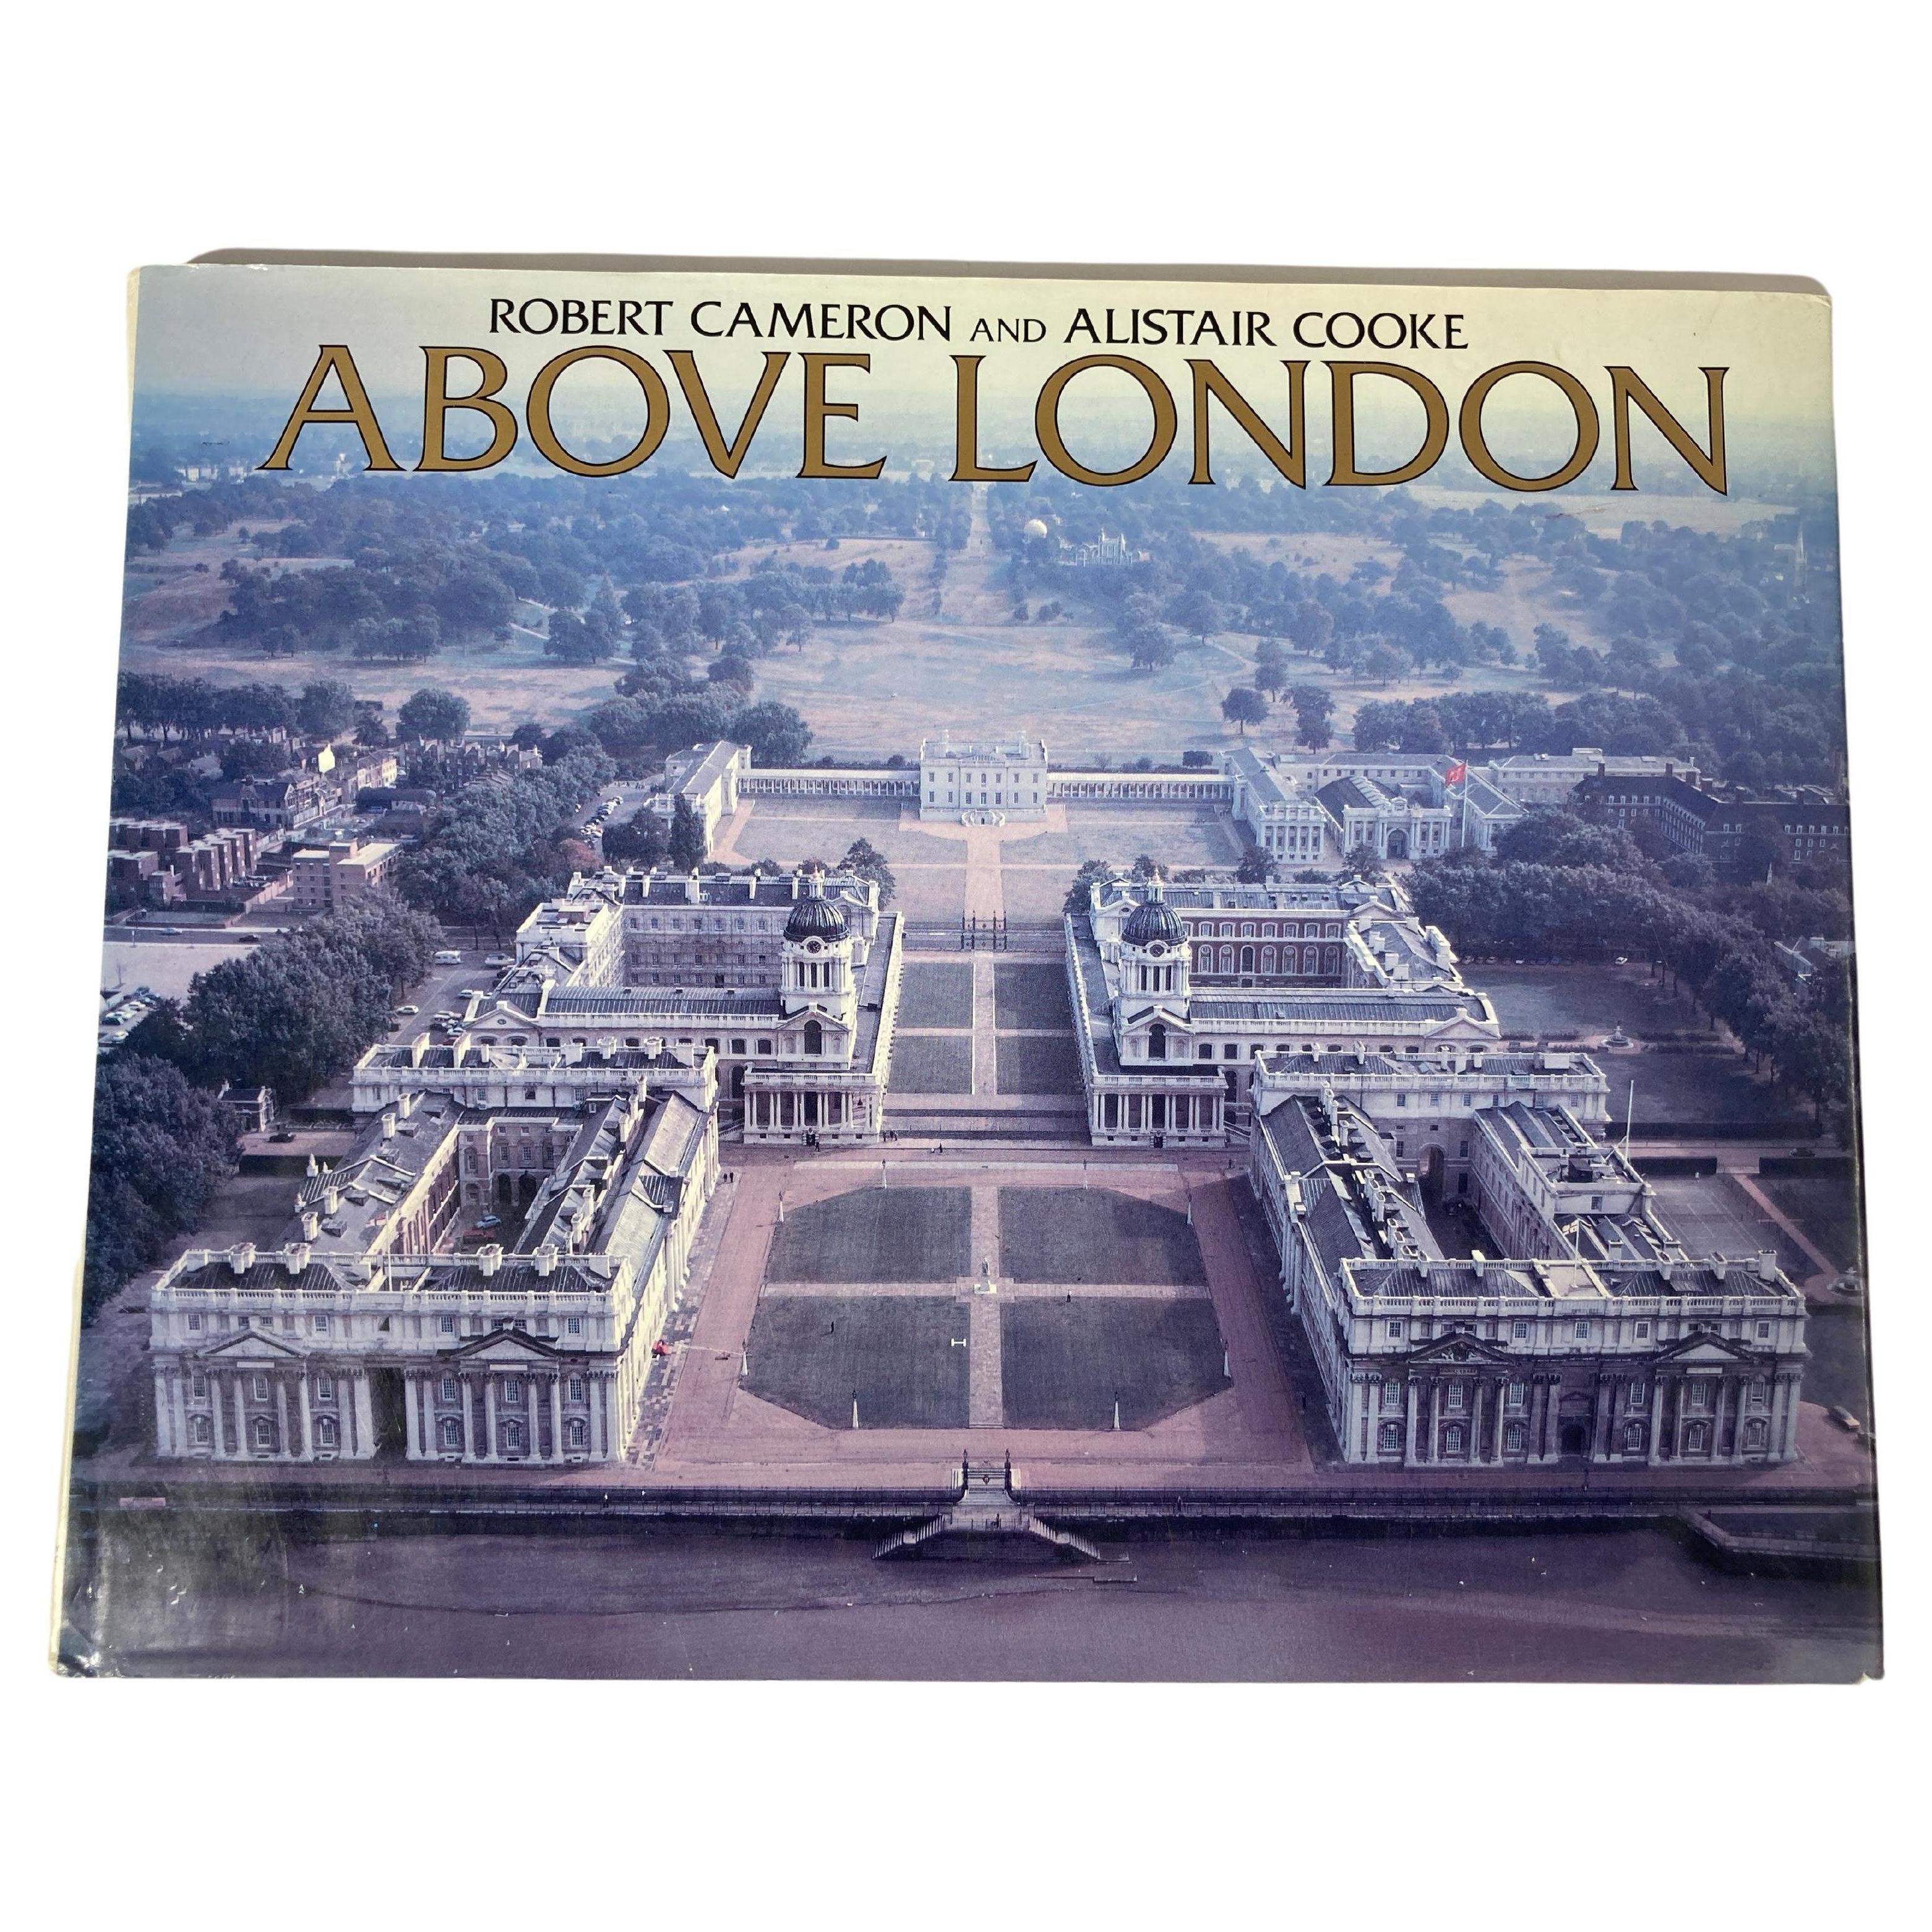 Above London by Robert Cameron